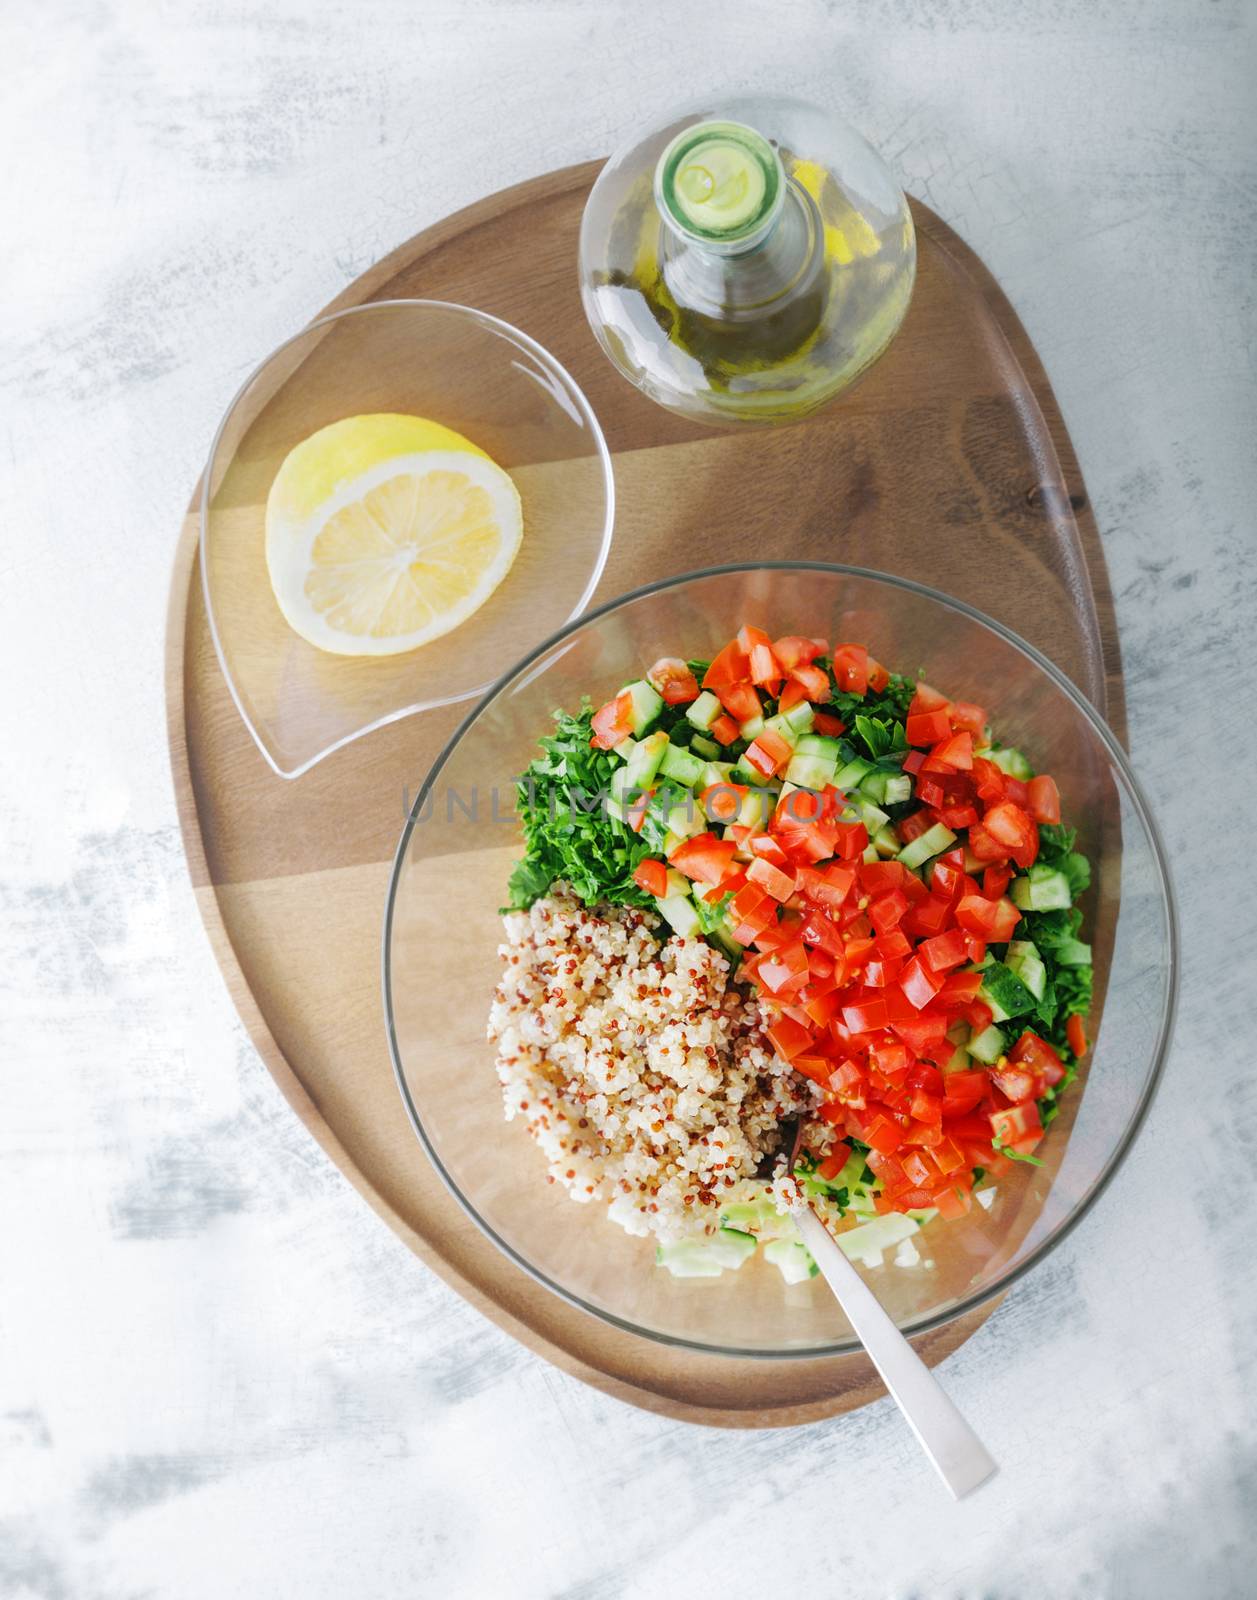 Quinoa tabbouleh salad on a wooden table by supercat67